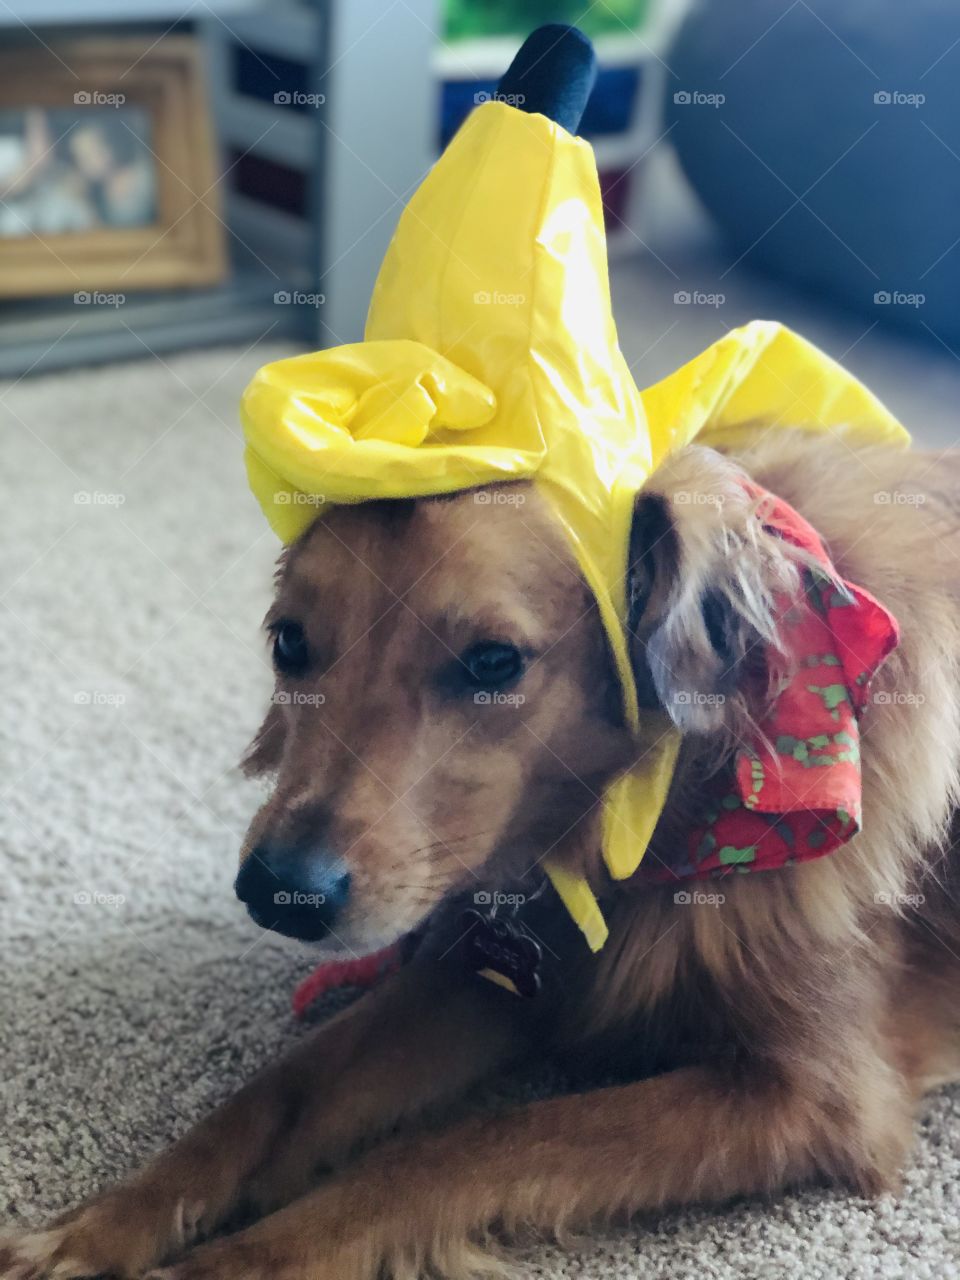 Audrey Pearl models her banana hat in preparation for Halloween 2019. She prefers real bananas, but was a good sport.